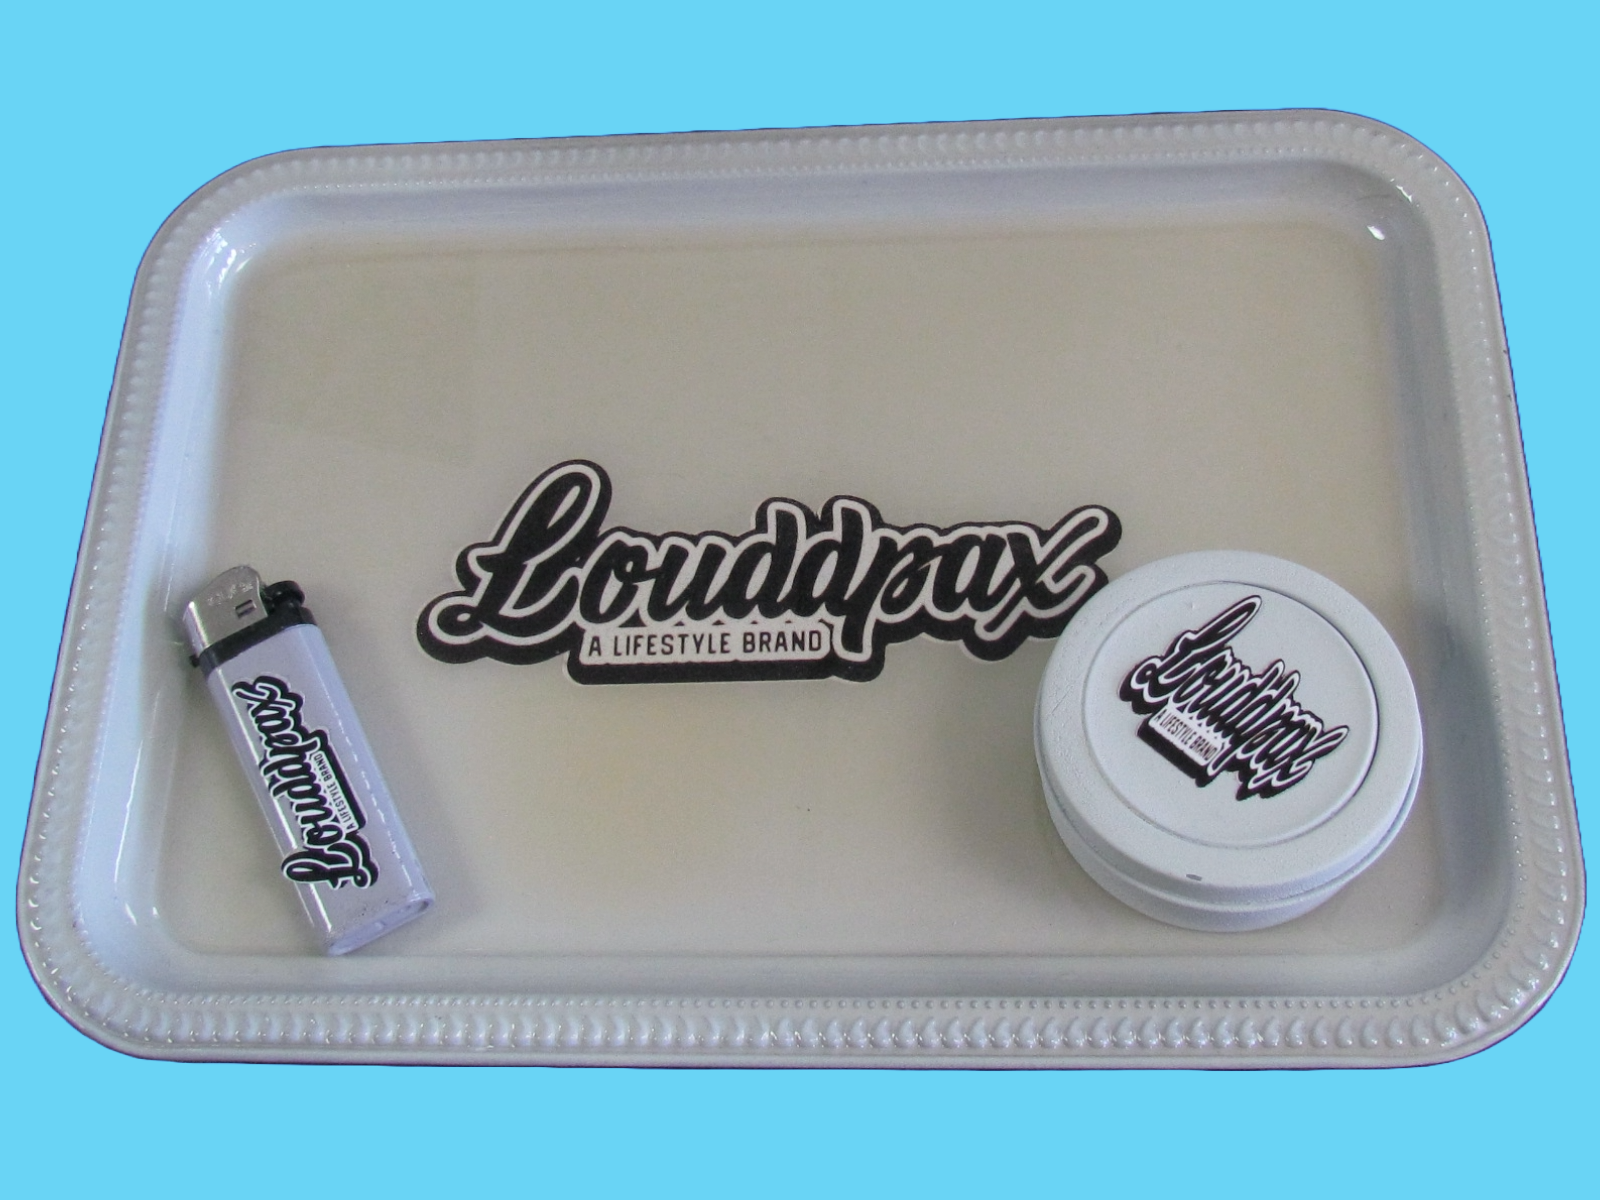 Louddpax rolling tray w/lighter and storage tin.